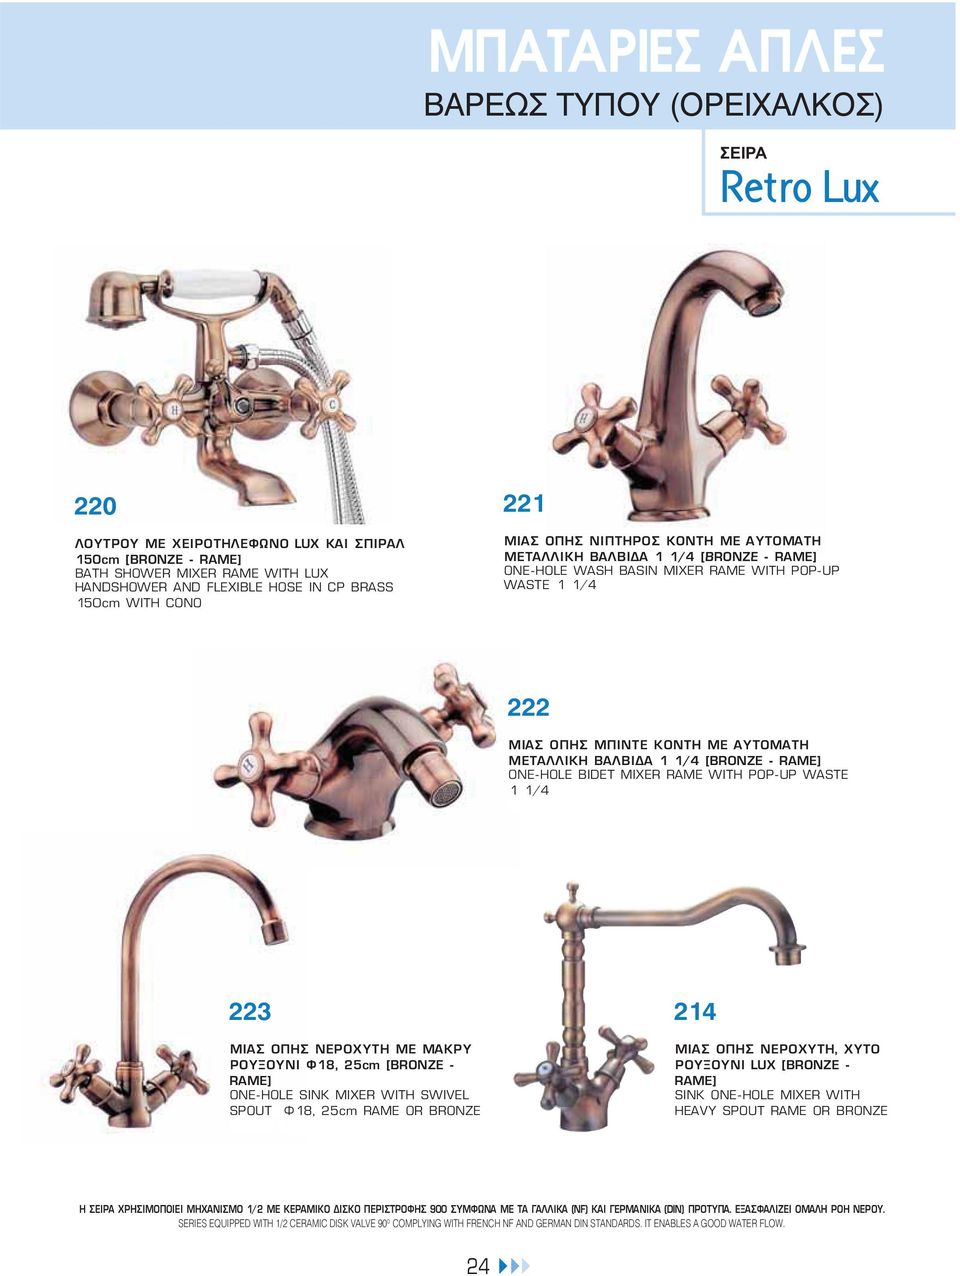 [BRONZE - RAME] ONE-HOLE BIDET MIXER RAME WITH POP-UP WASTE 1 1/4 223 ΜΙΑΣ ΟΠΗΣ ΝΕΡΟΧΥΤΗ ΜΕ ΜΑΚΡΥ ΡΟΥΞΟΥΝΙ Φ18, 25cm [BRONZE - RAME] ONE-HOLE SINK MIXER WITH SWIVEL SPOUT Φ18, 25cm RAME OR BRONZE 214